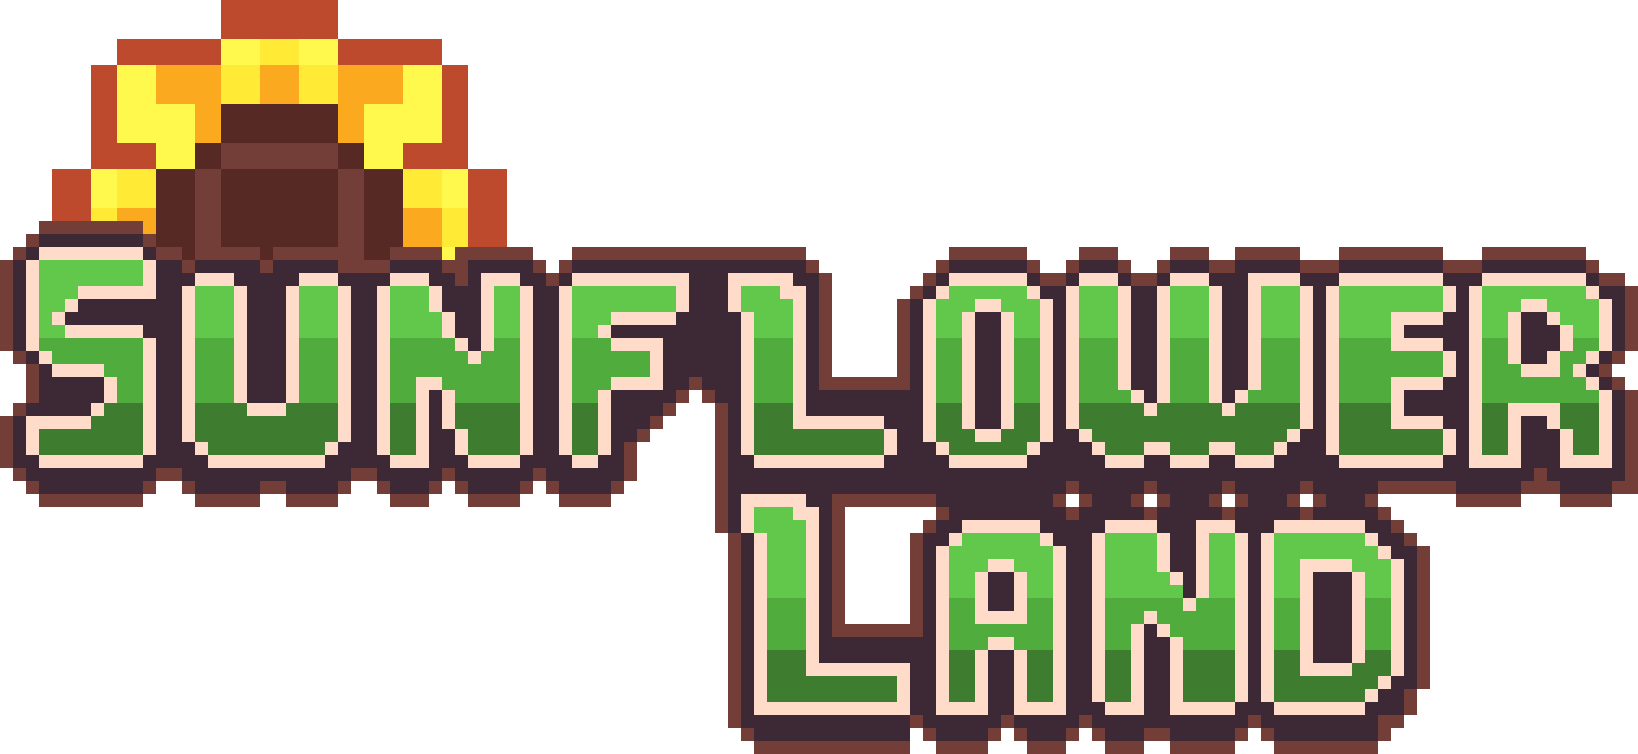 SFLlogo_scaled_13x_pngcrushed.png